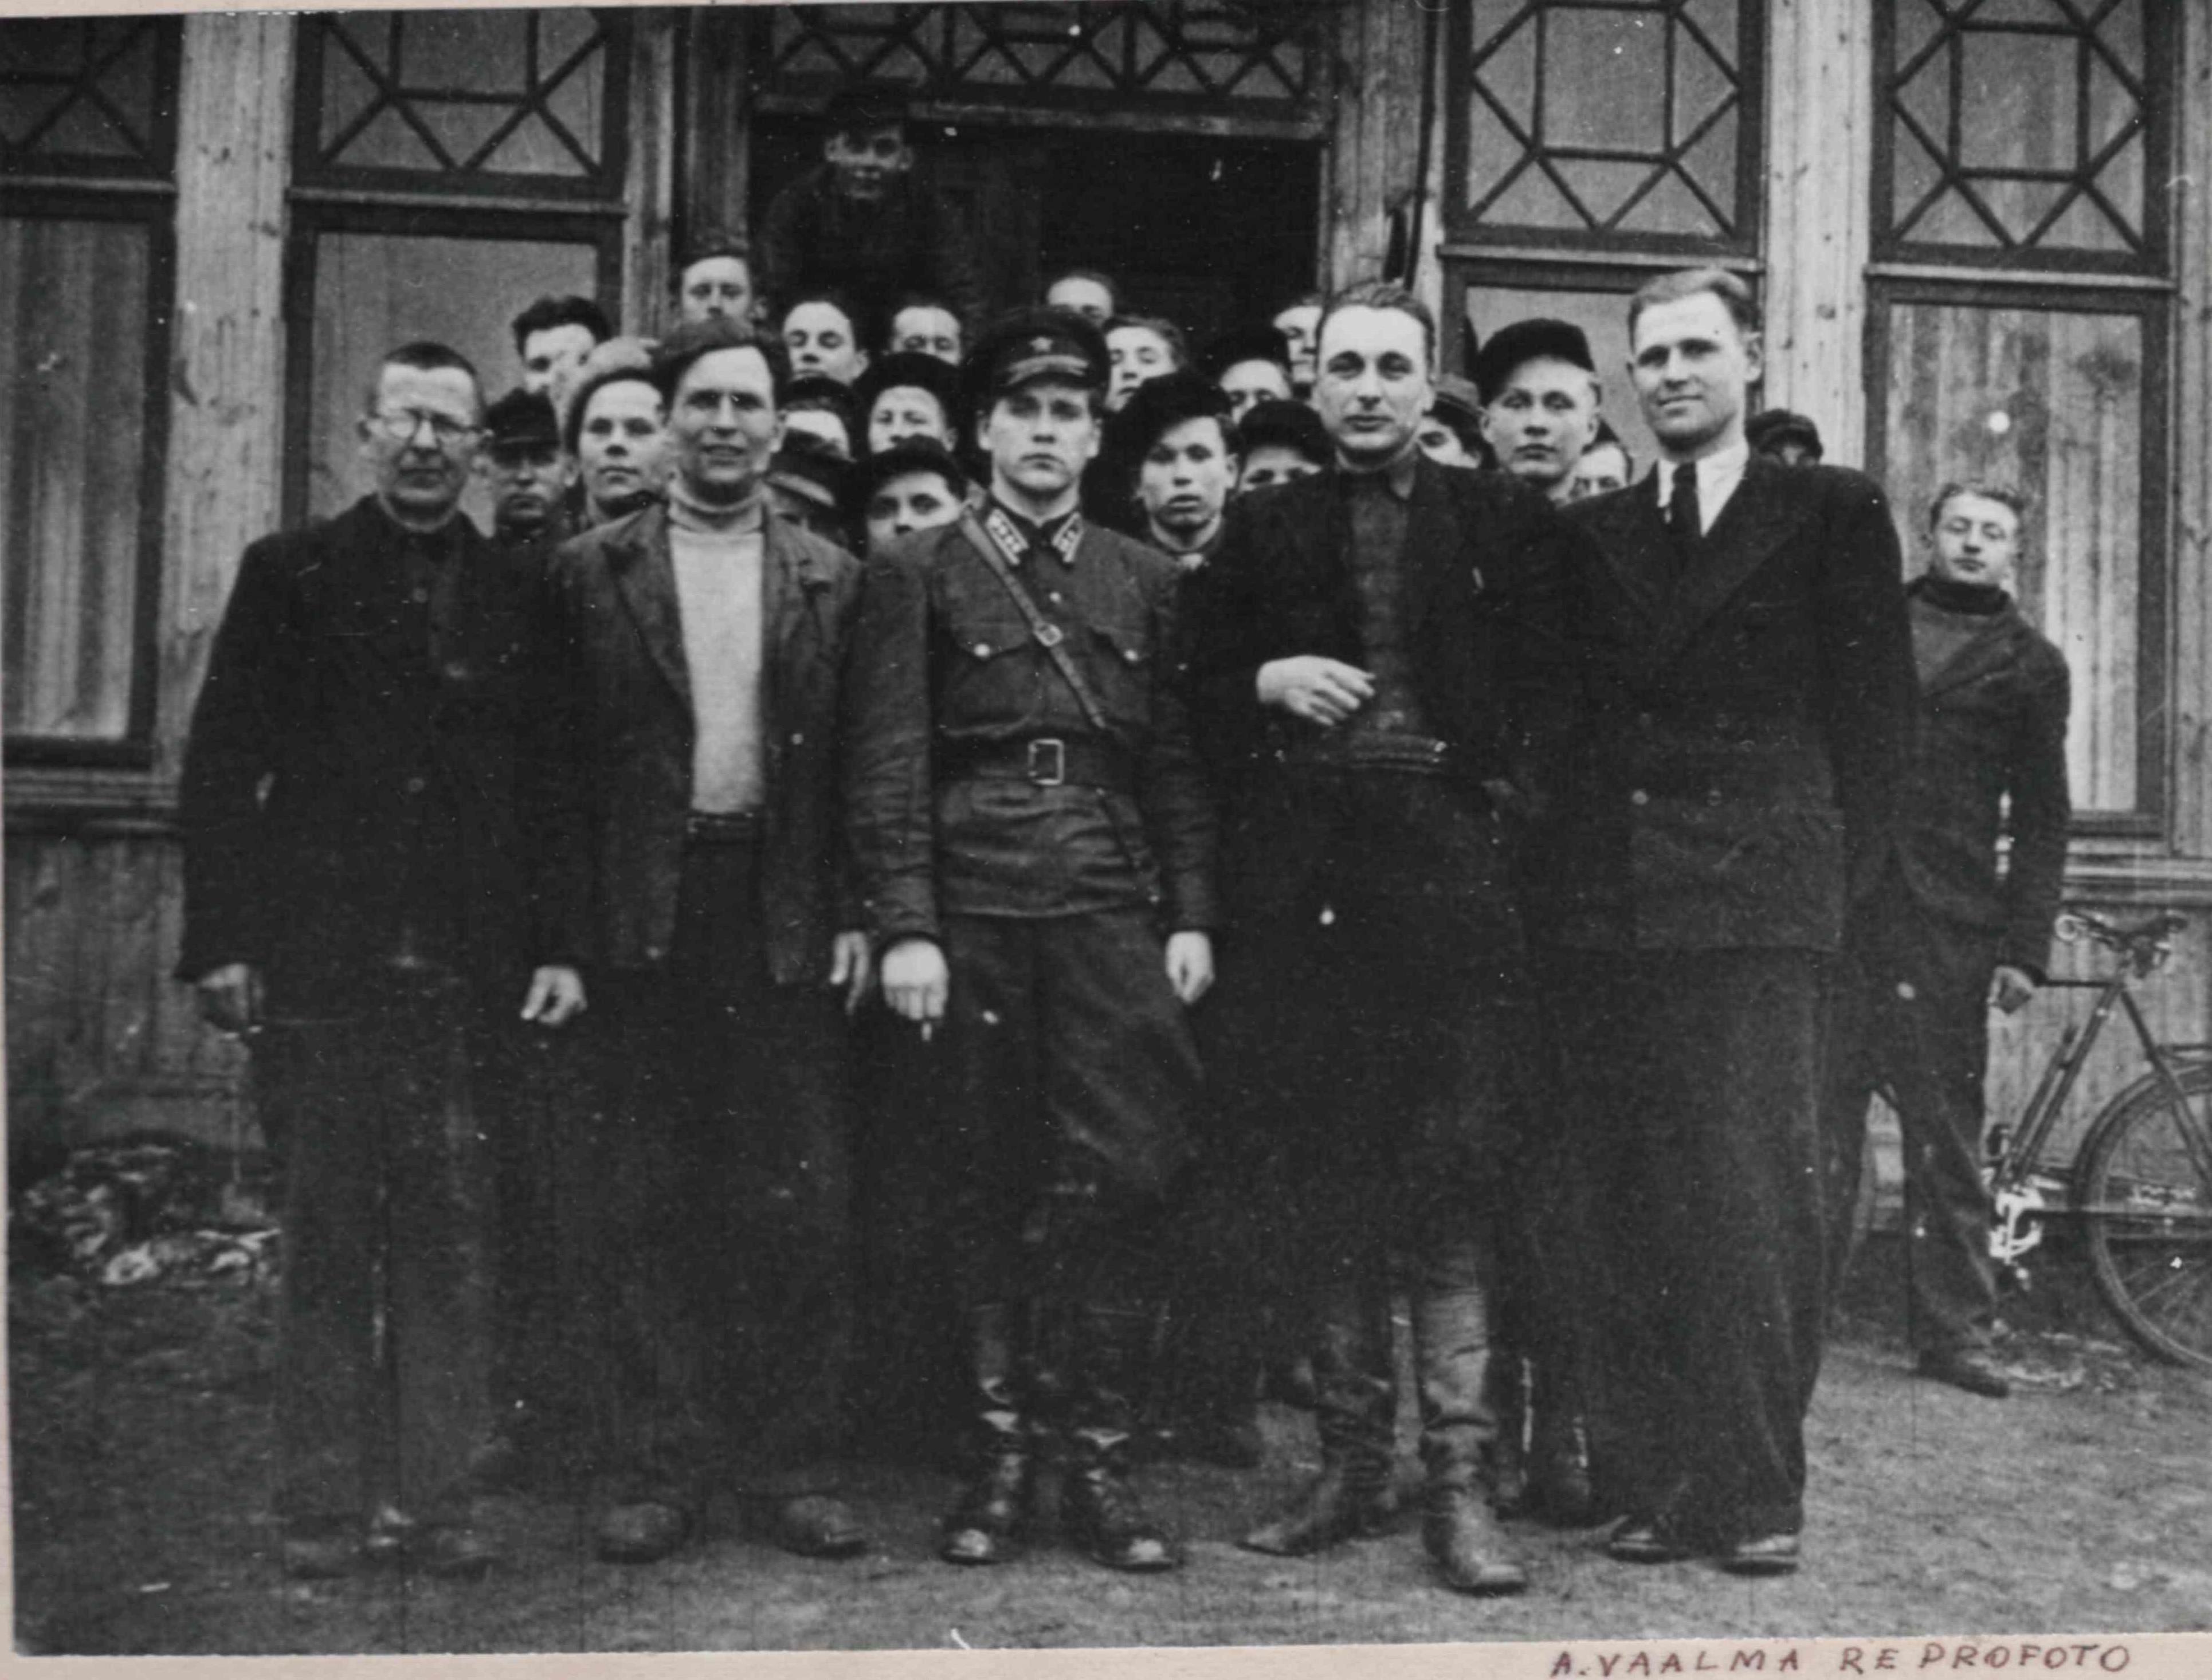 Courses for trainers. From the left, the first director of the course Johannes Kuusik